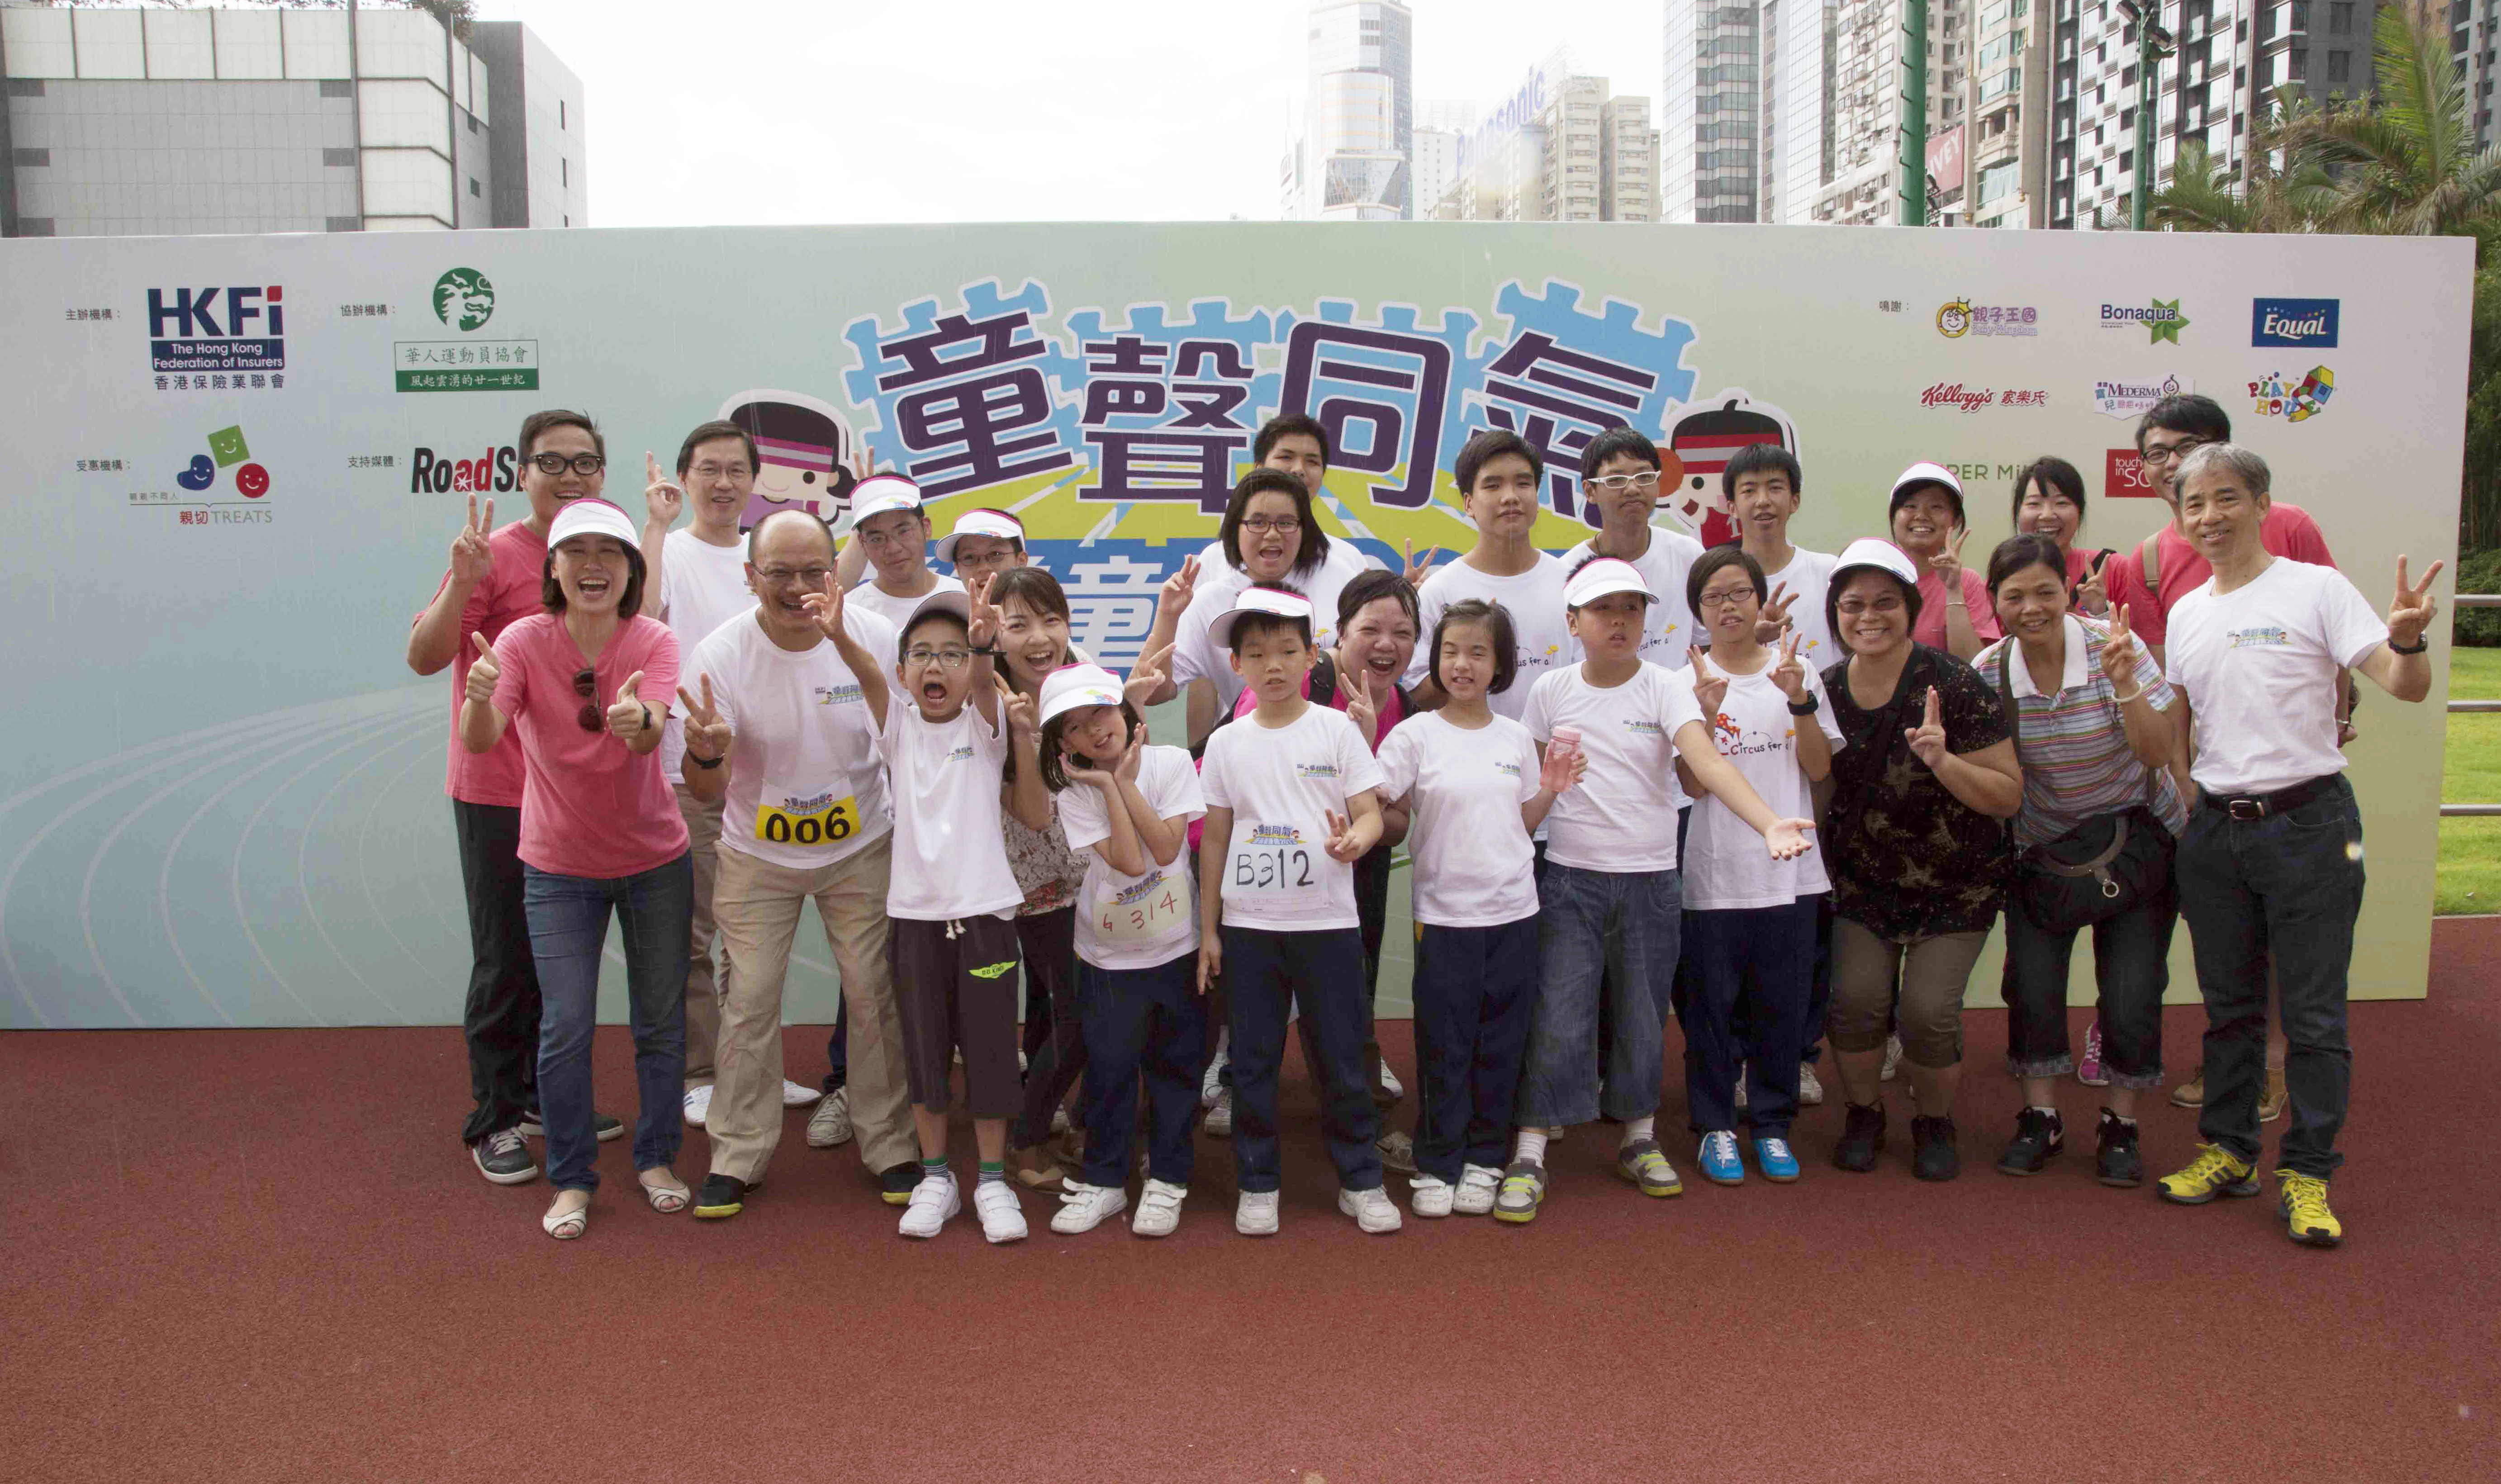 Kids Day Out for Fun and Charity video clips (1)